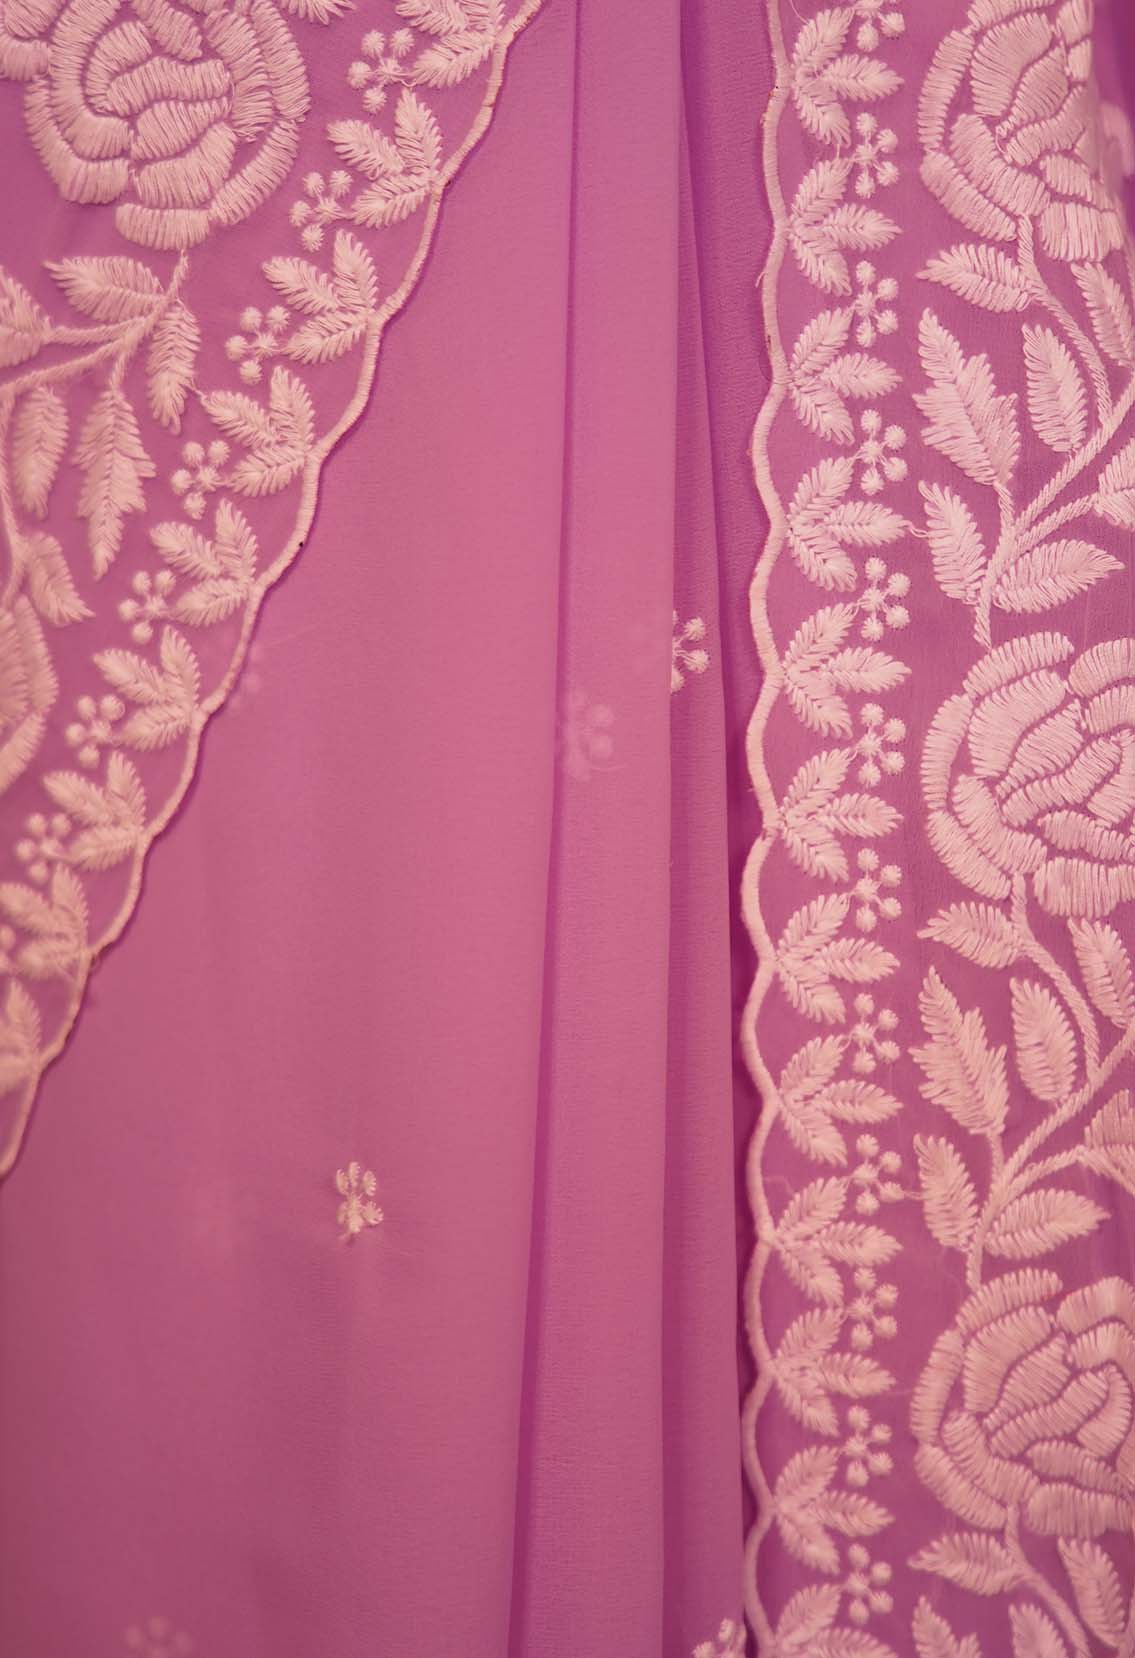 Ready To Wear Lavender With White Embroidered Border Wrap in 1 Minute Saree